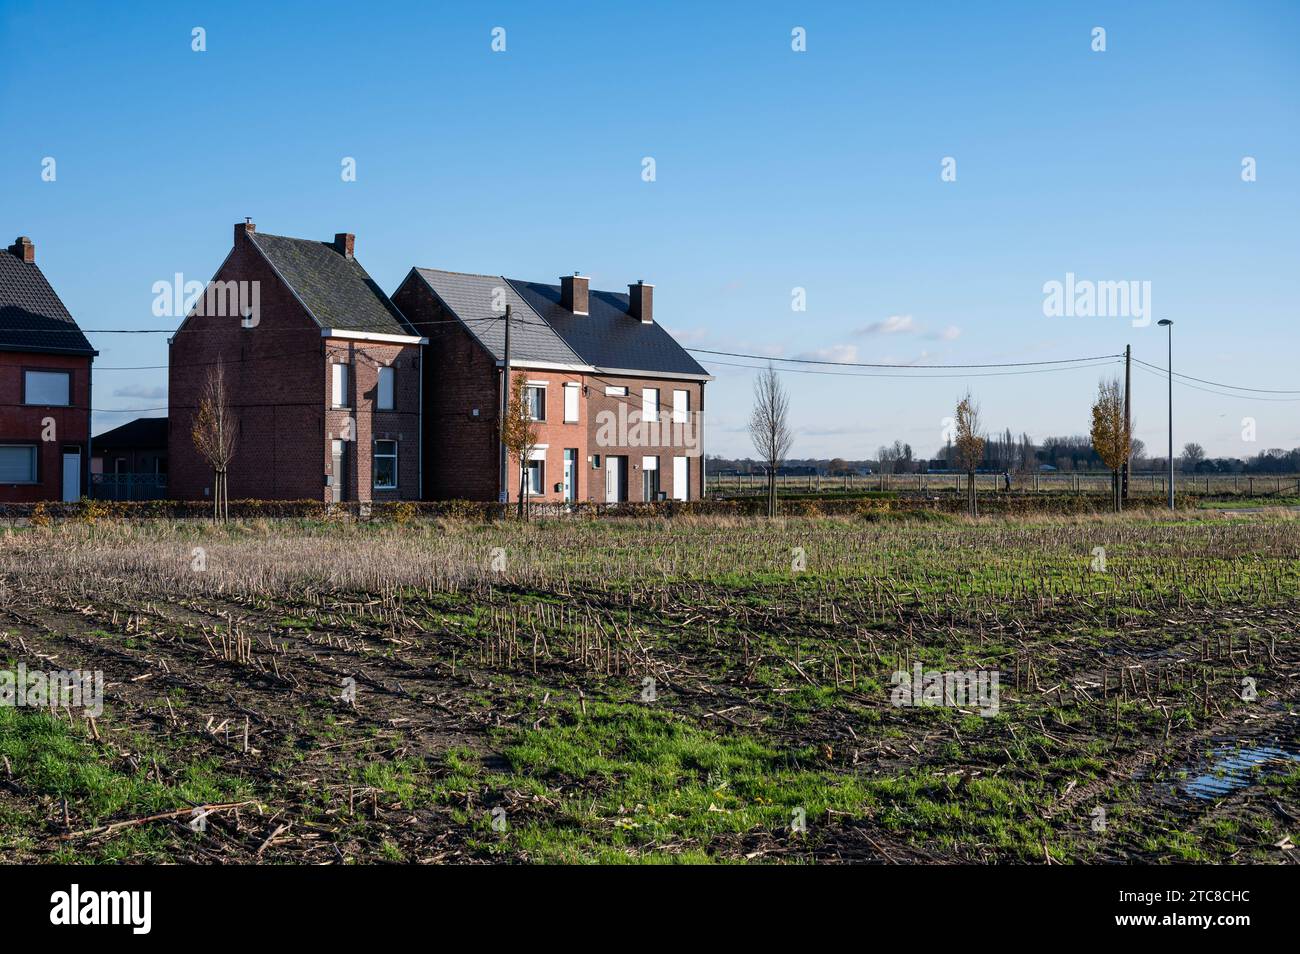 Farmhouses at an harvested agriculture field around Londerzeel, Brabant, Belgium Credit: Imago/Alamy Live News Stock Photo